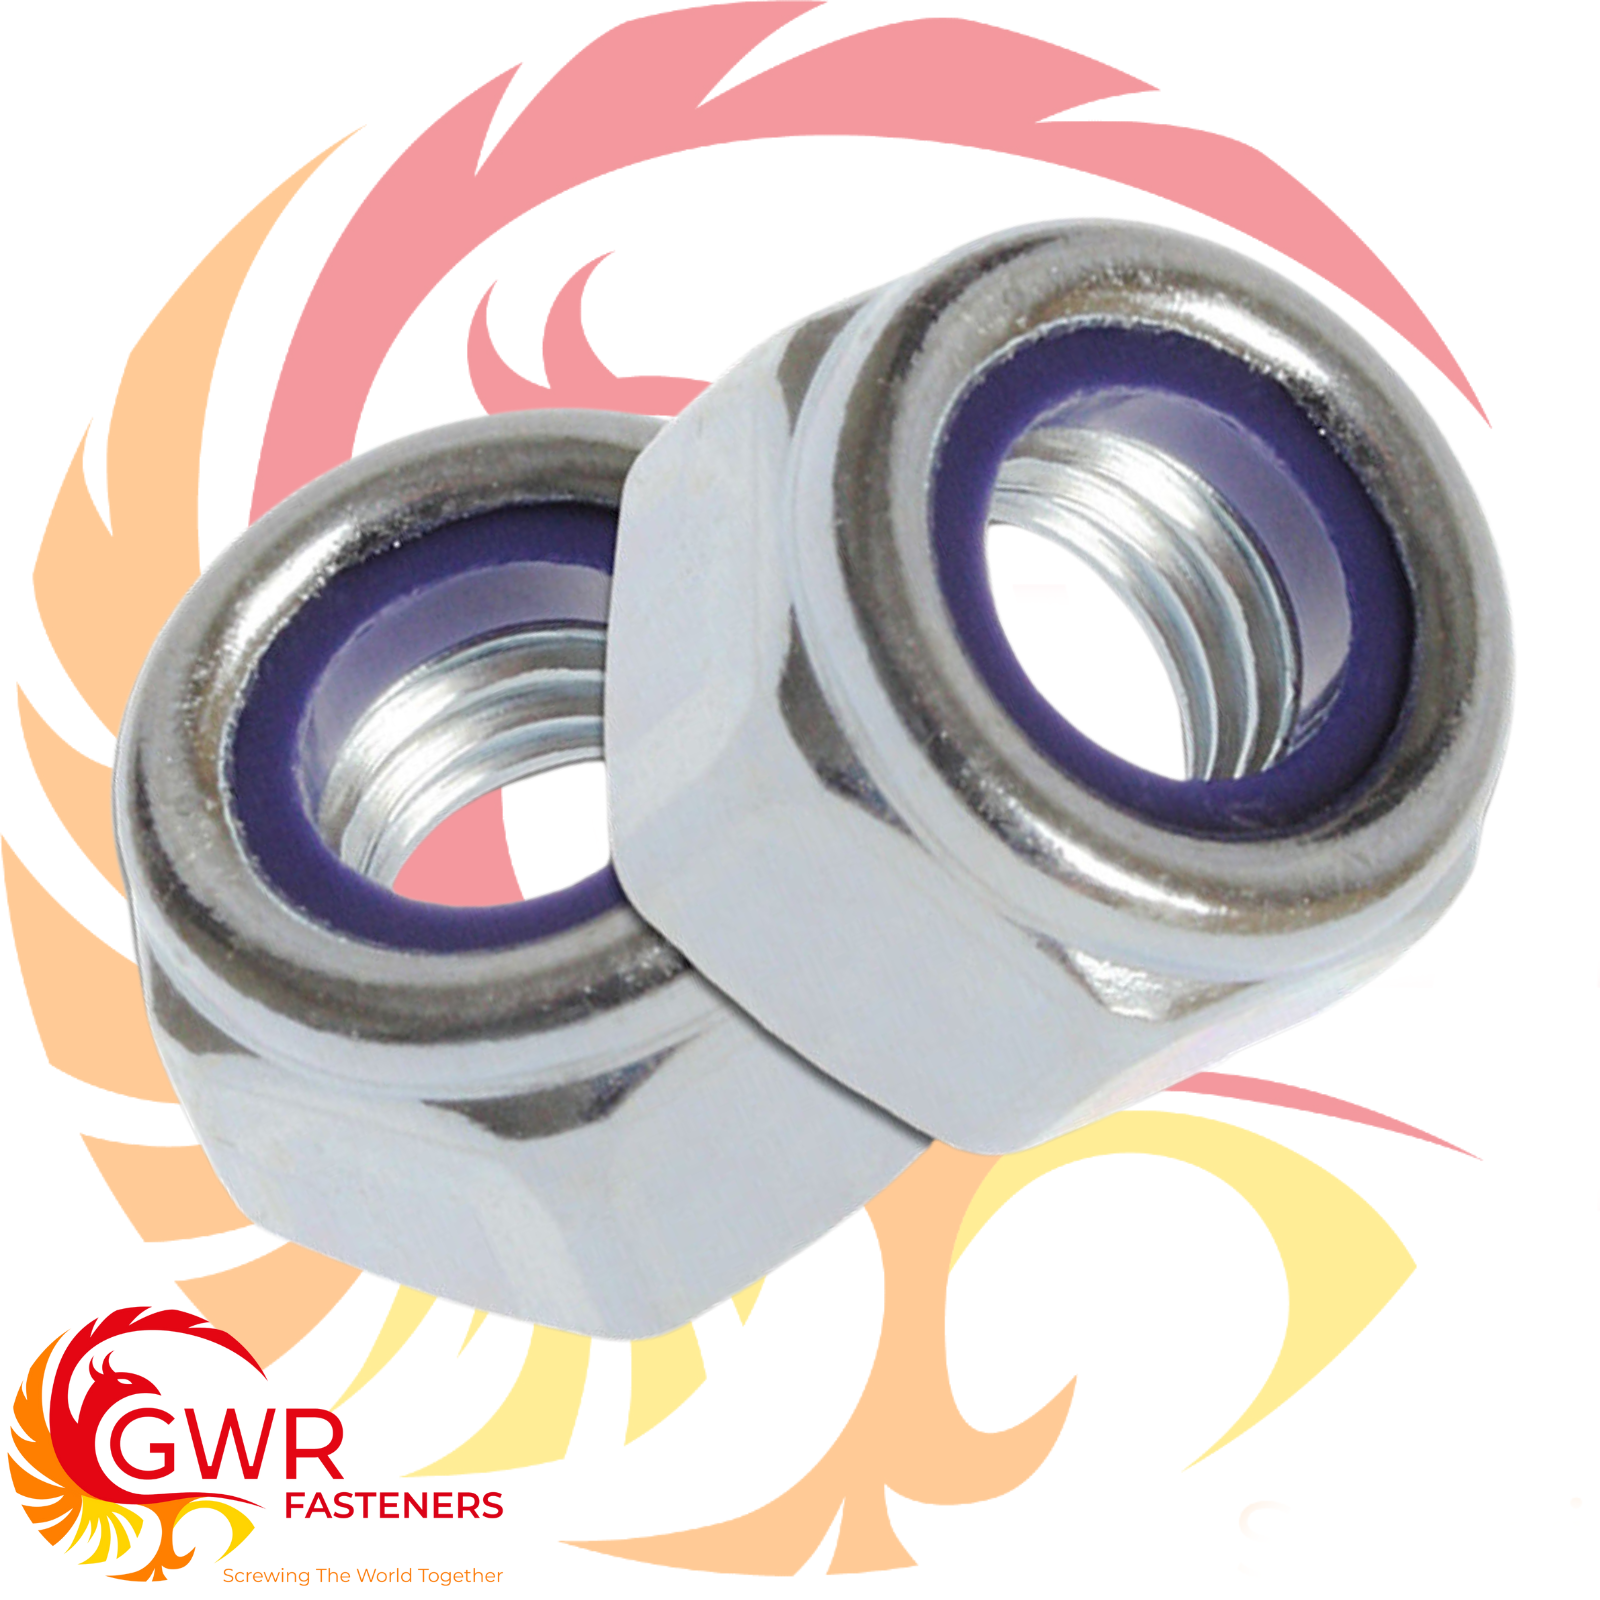 Specialty Fasteners and Components - GWR Fasteners Limited